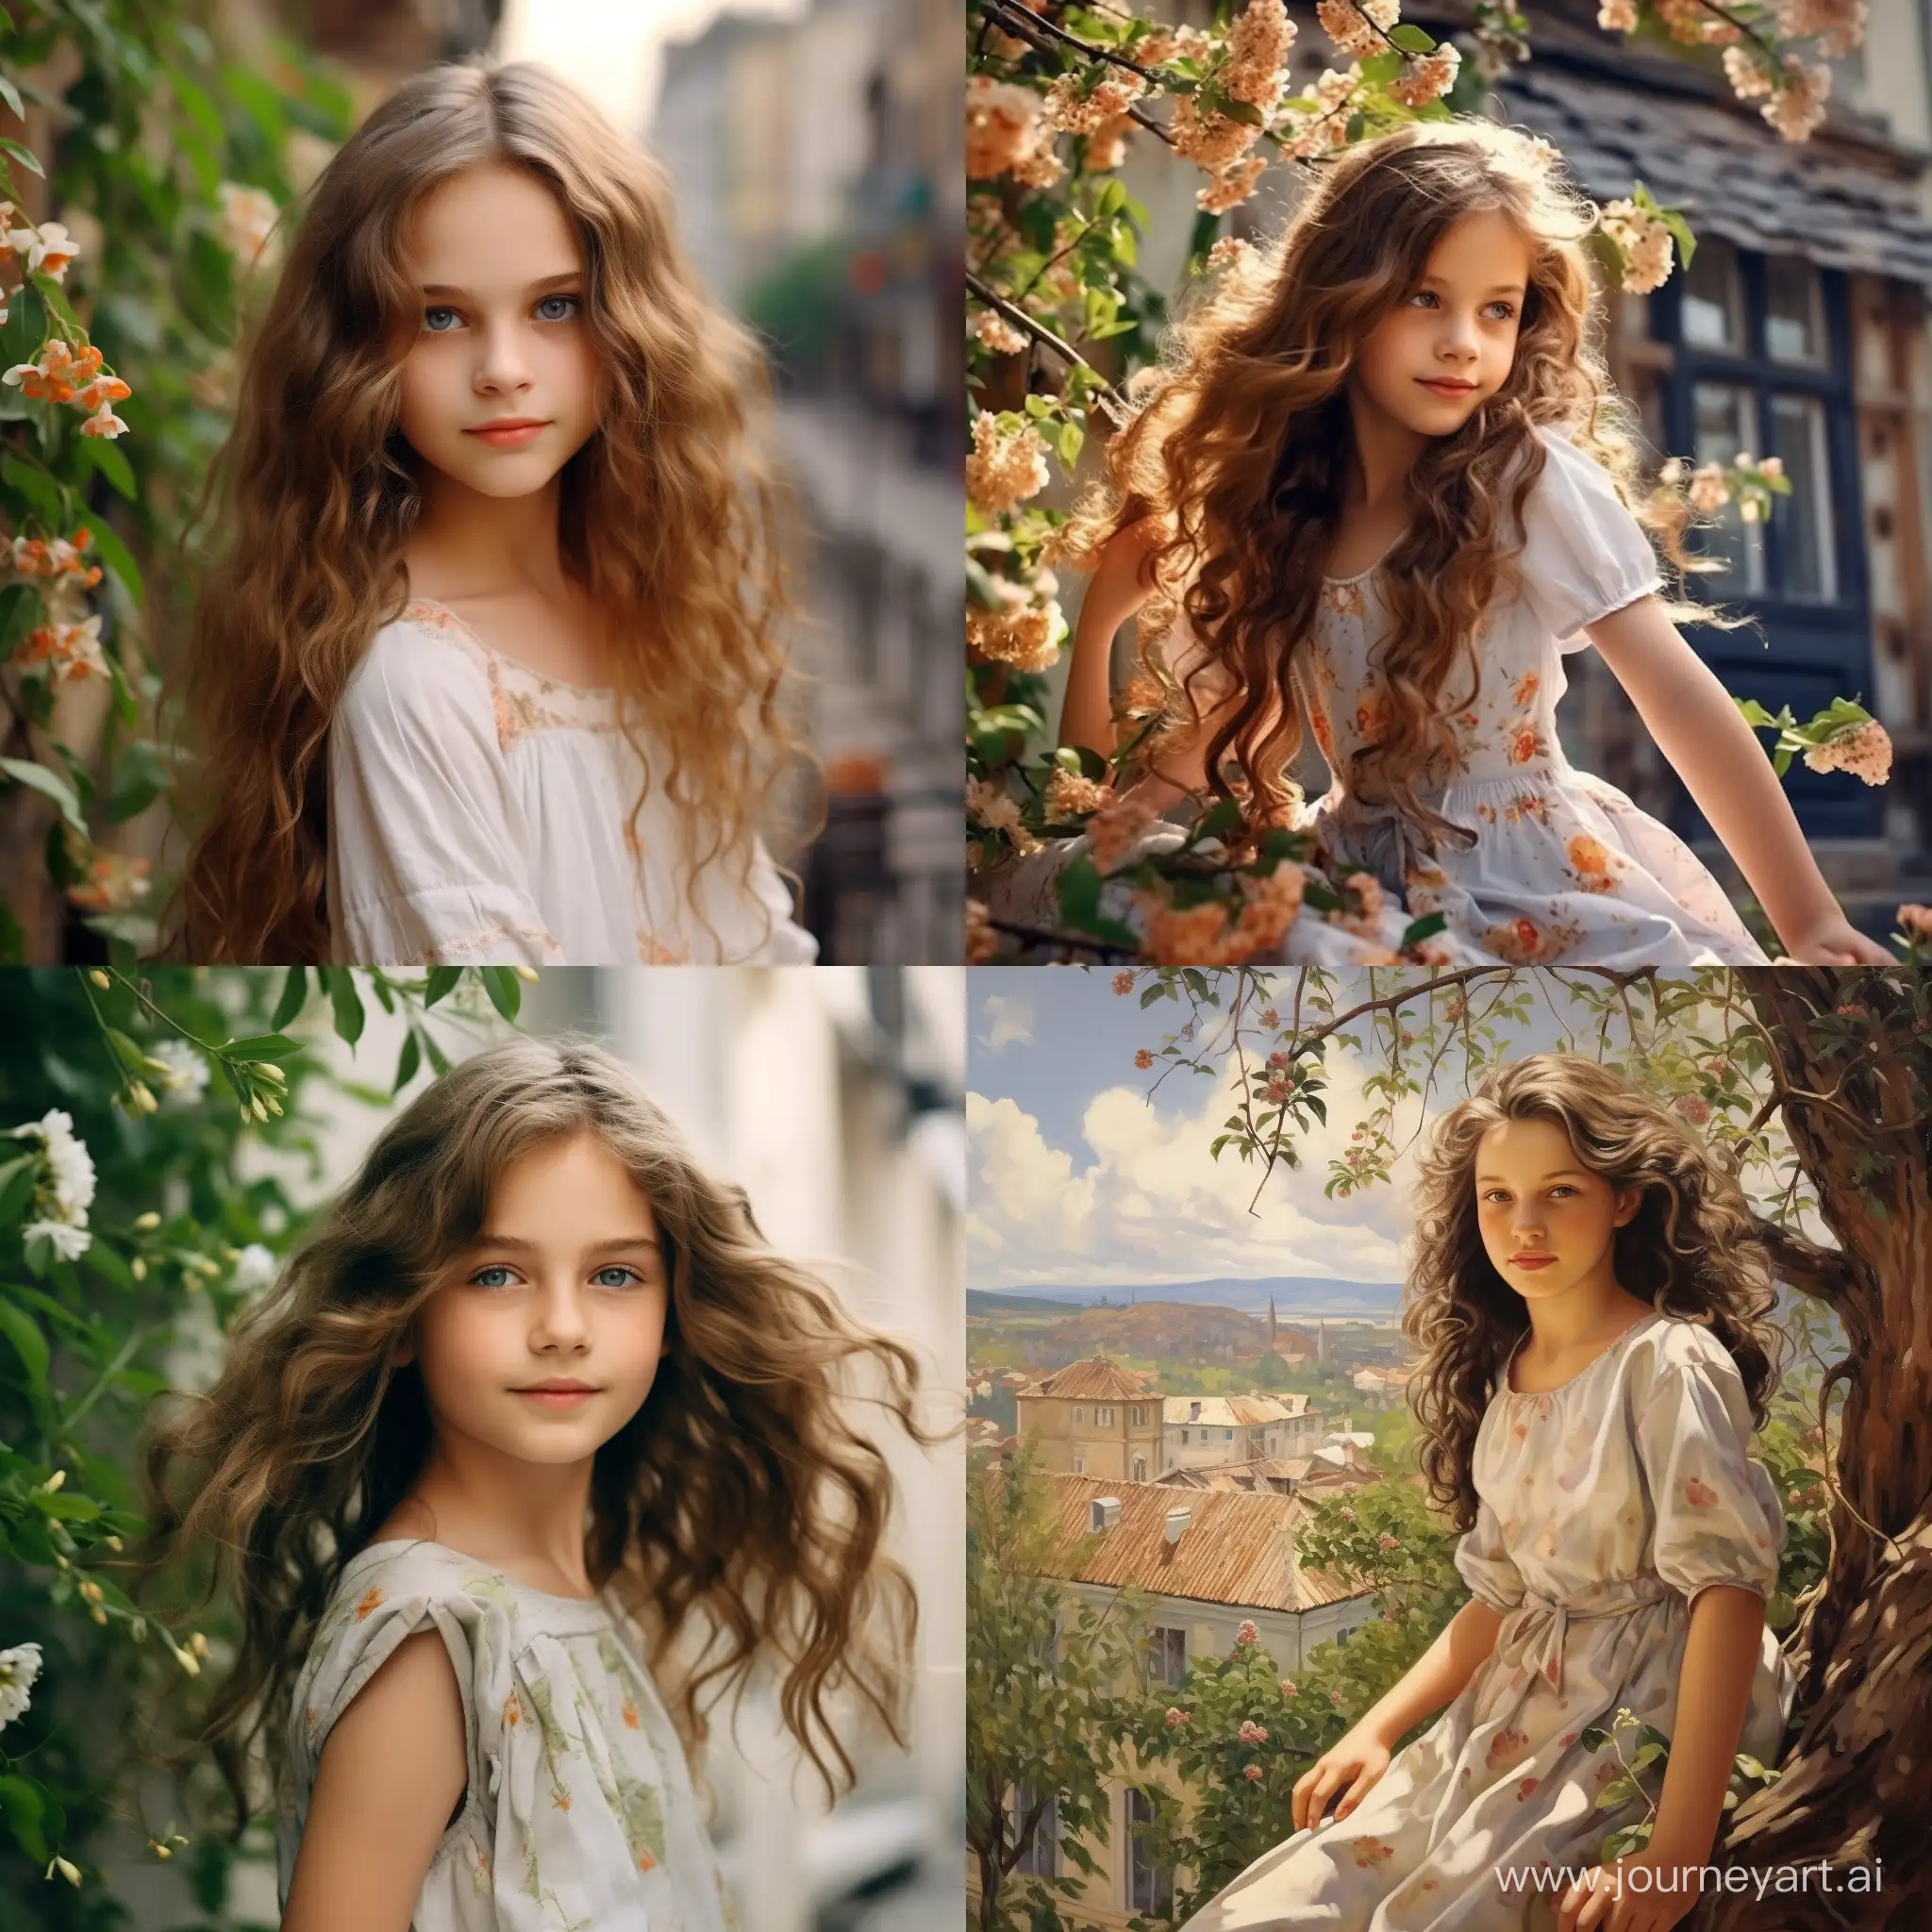 Enchanting-Apple-Blossom-Memory-Graceful-12YearOld-Girl-in-a-Light-Calico-Dress